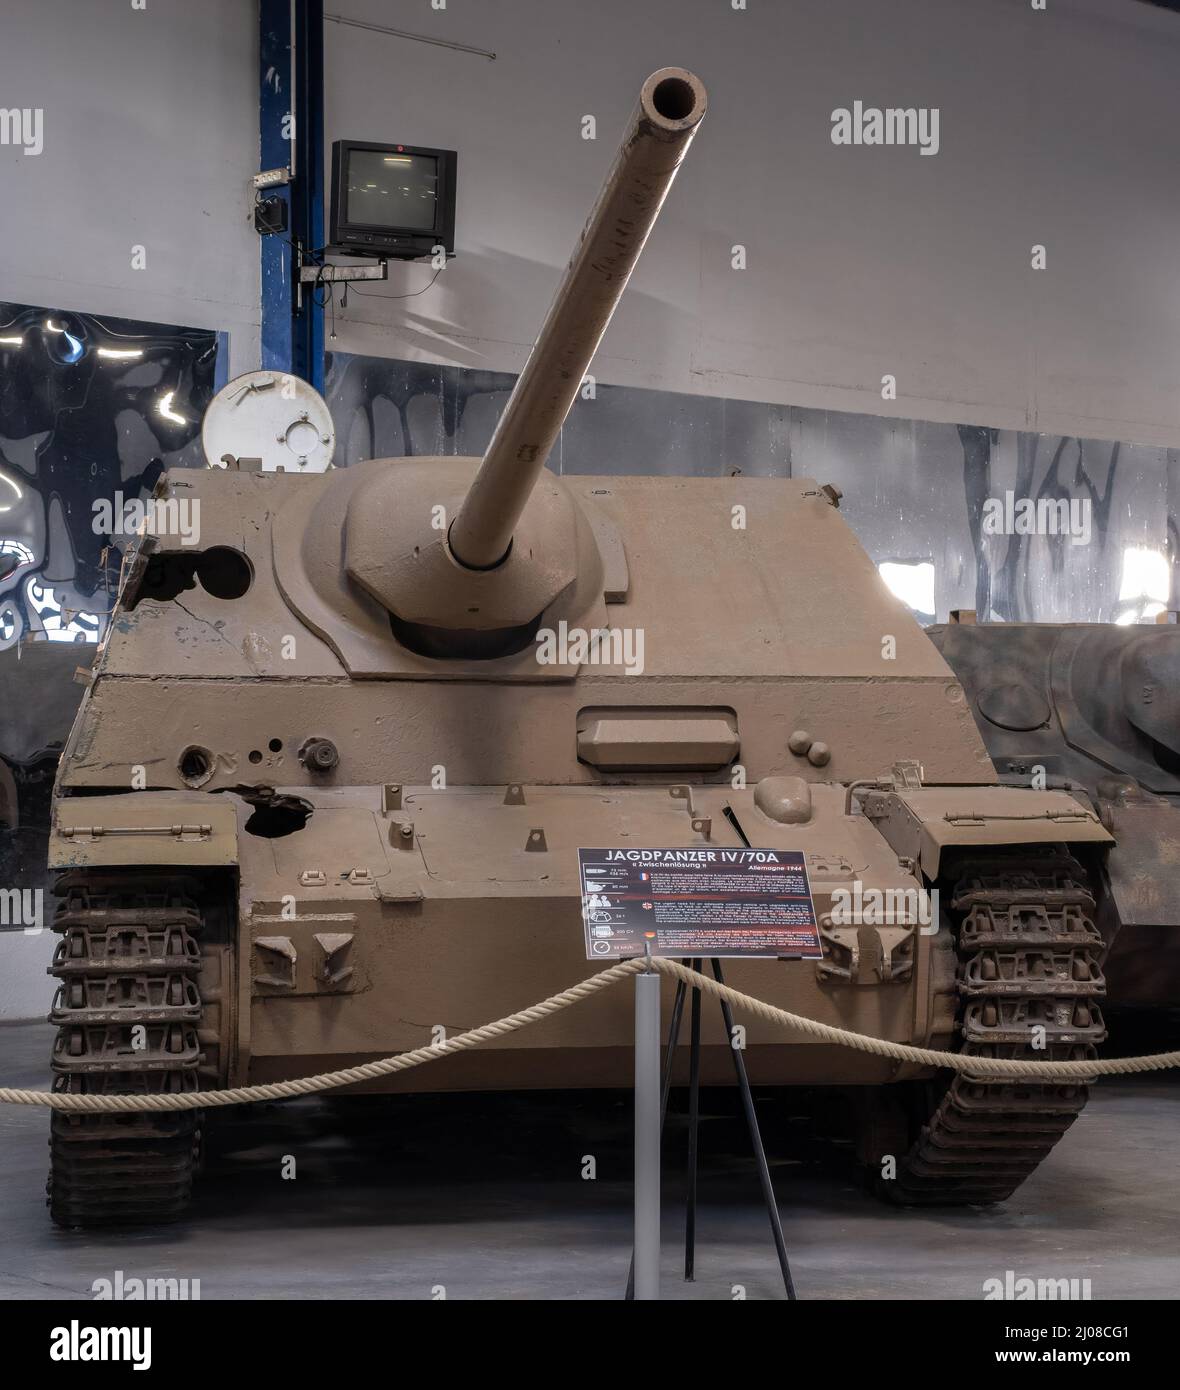 Saumur, France - February 26, 2022:  German Jagdpanzer IV 70A (tank destroyer). Tank museum in Saumur (Musee des Blindes). Second world war exhibition Stock Photo